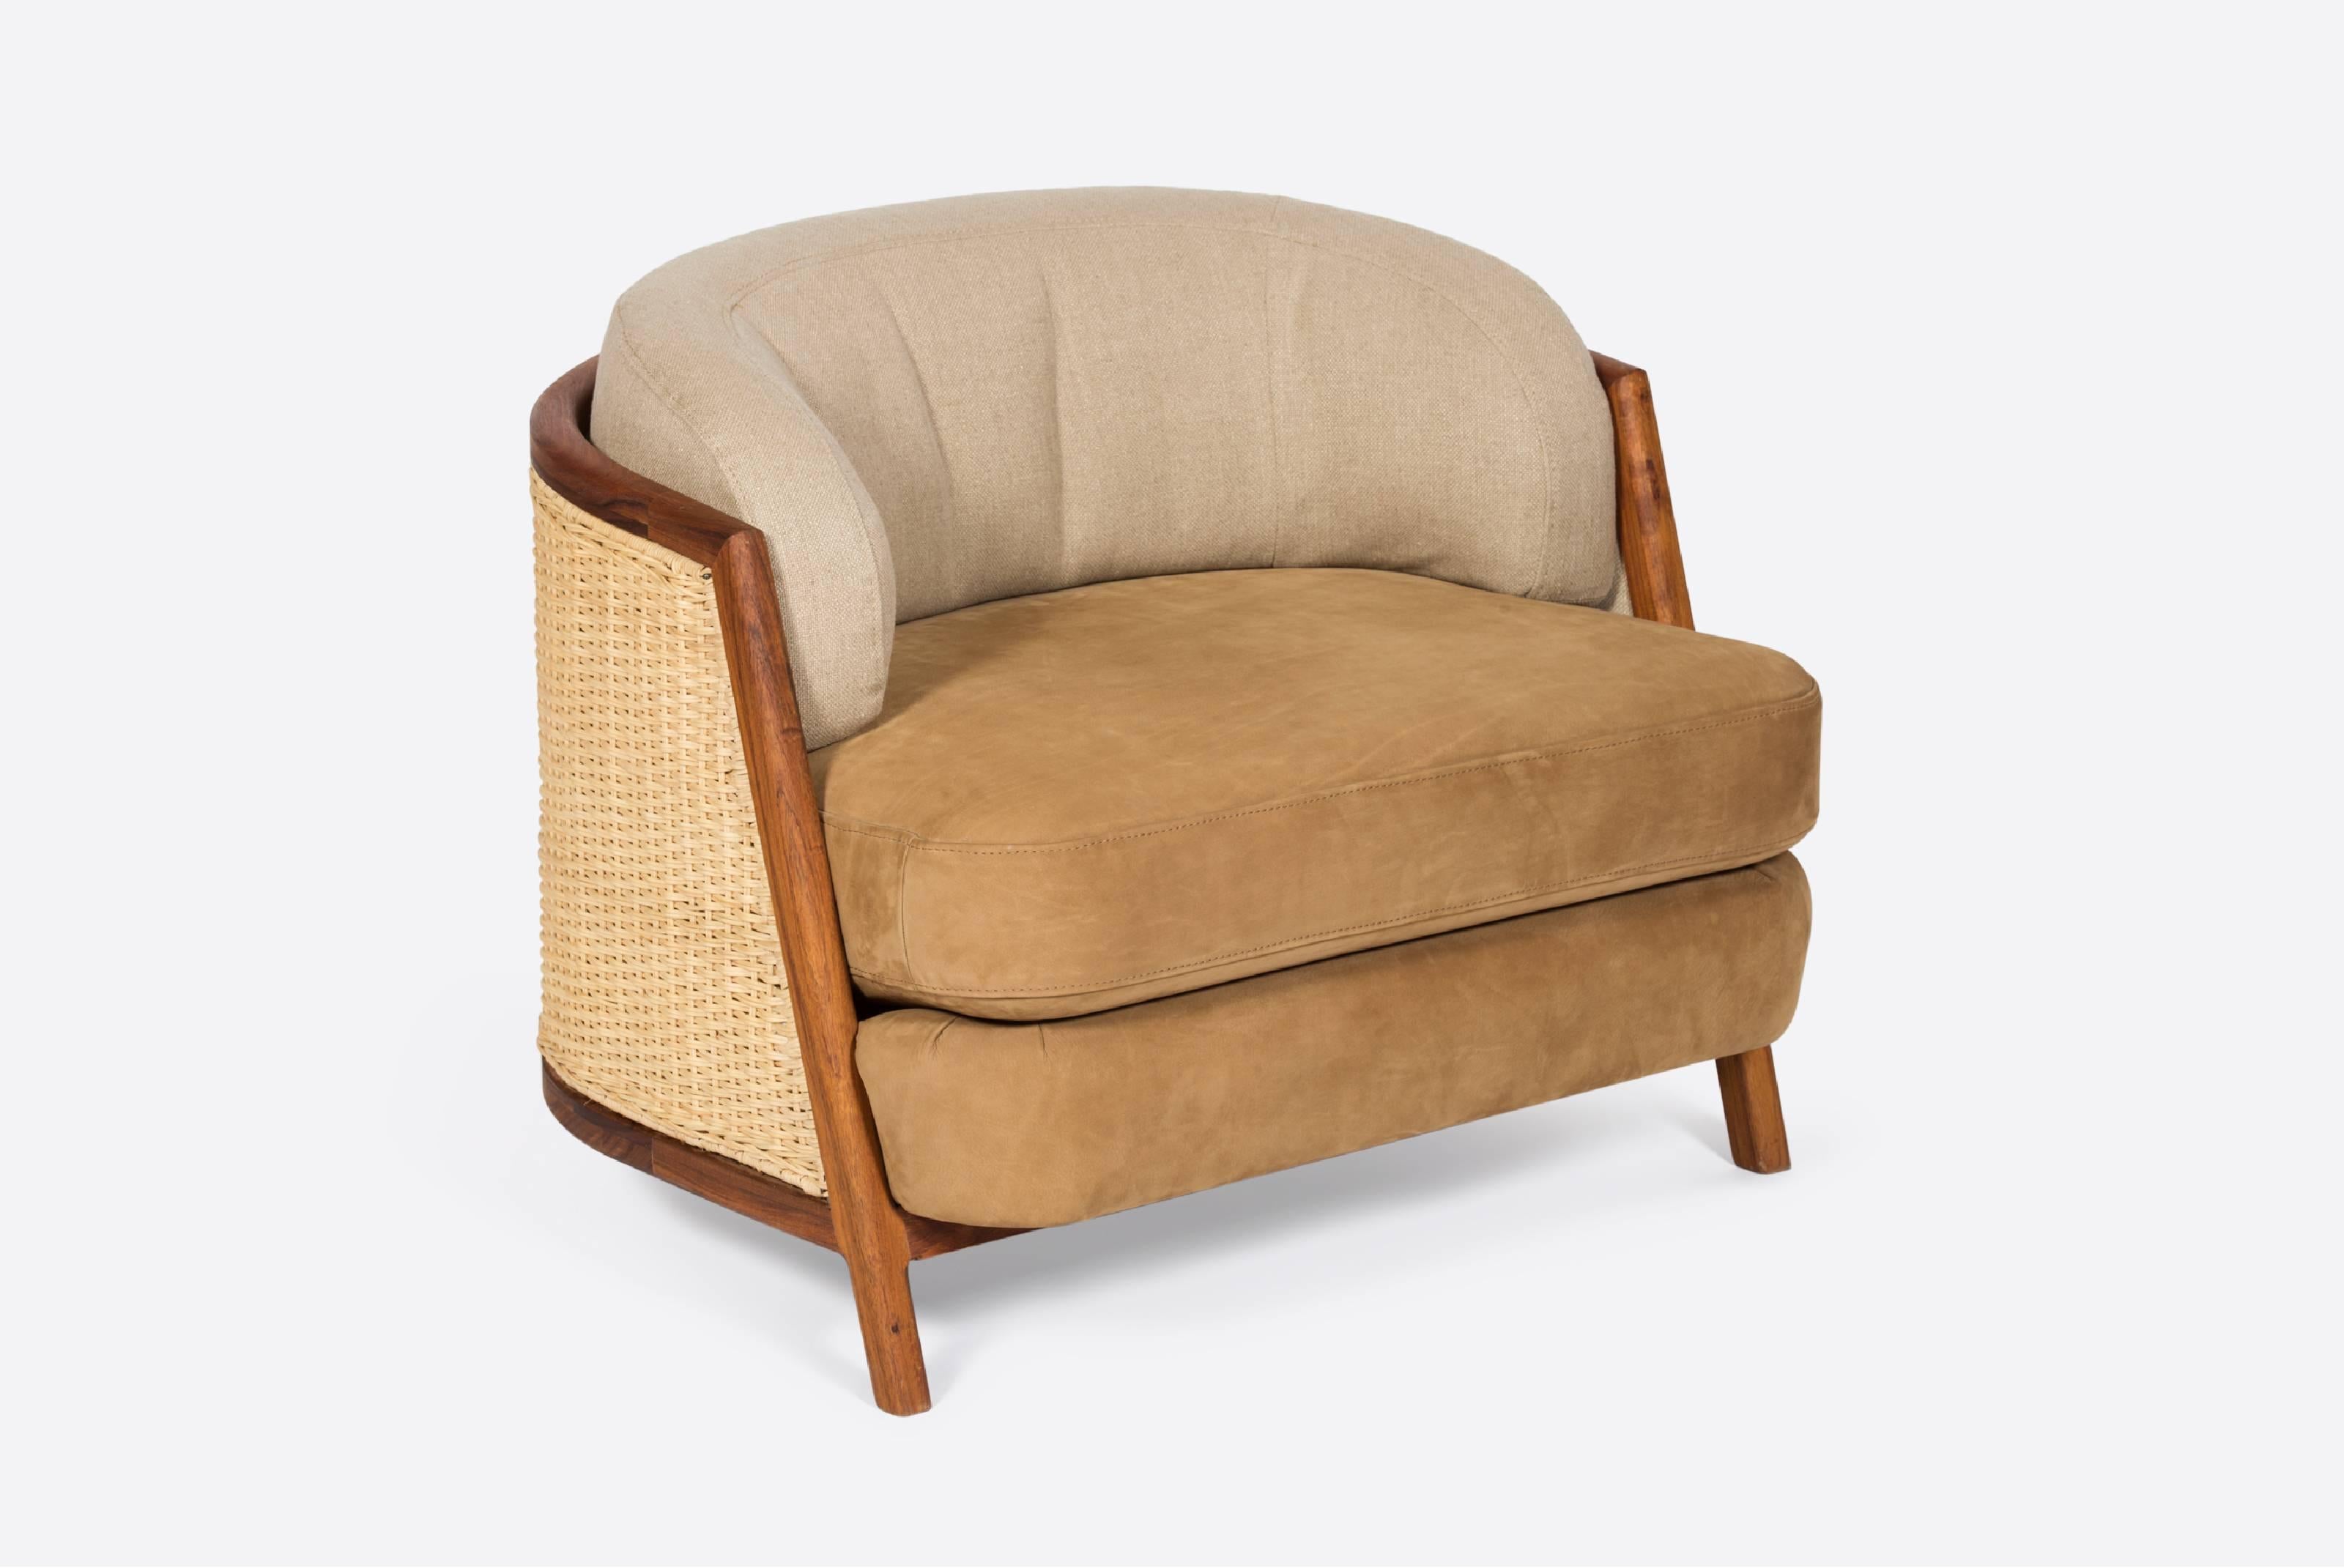 A collection of armchairs that aims to enhance the work of artisans in Mexico. With a rattan back that provides sophistication and a warm touch to the piece.